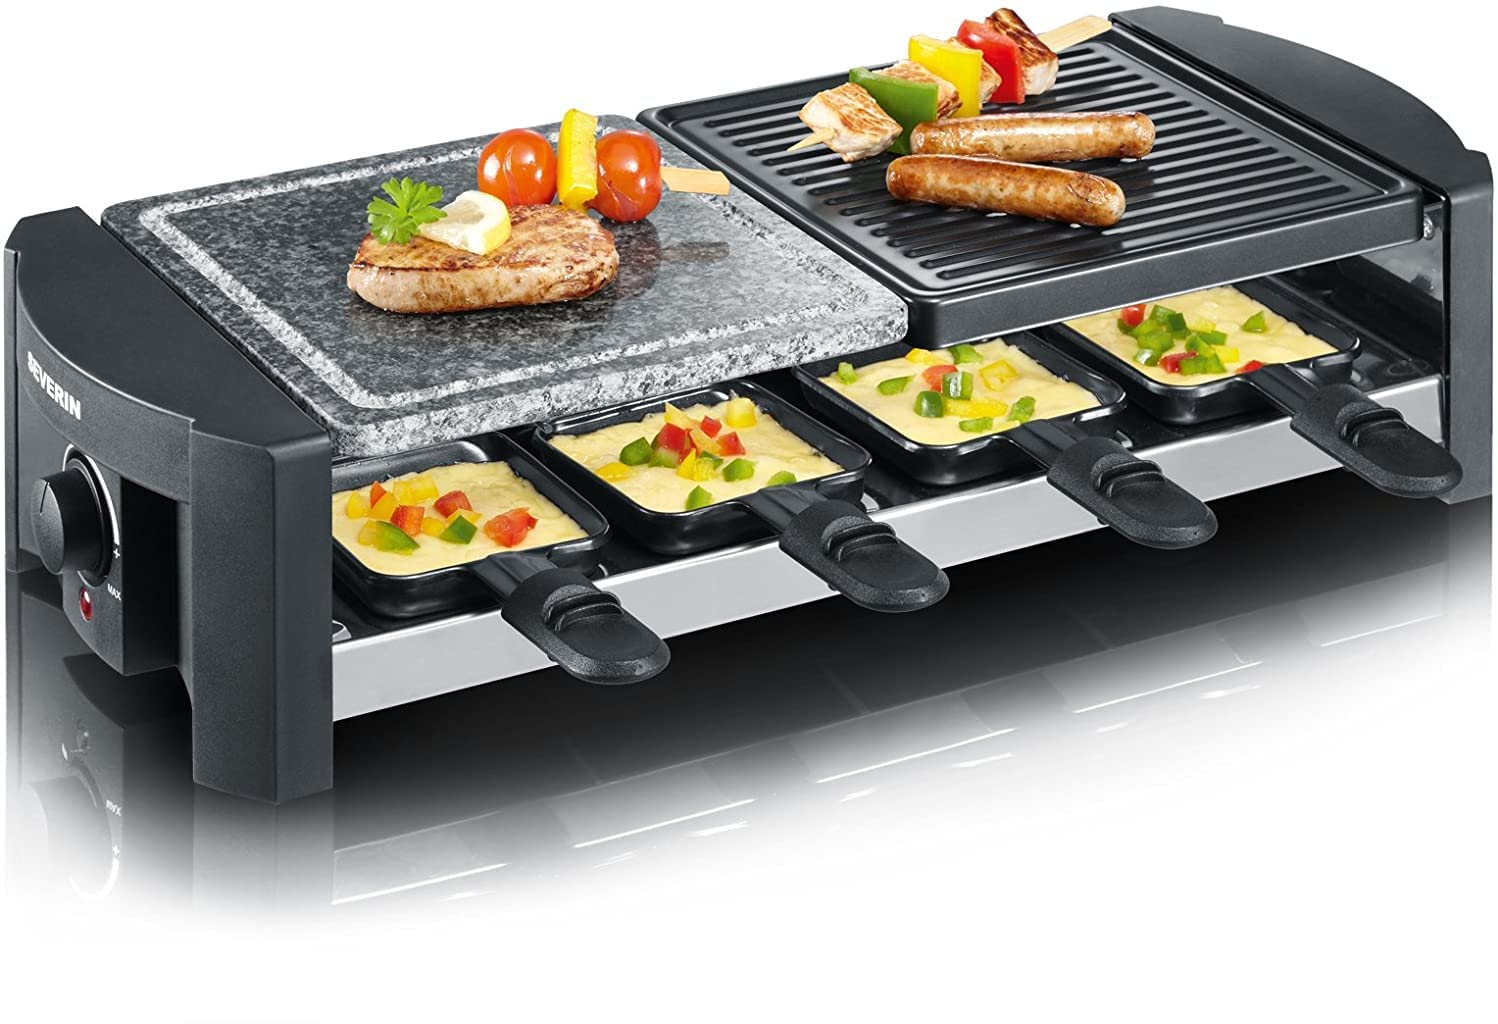 SEVERIN RG 2683 - raclette/grill/hot stone - black